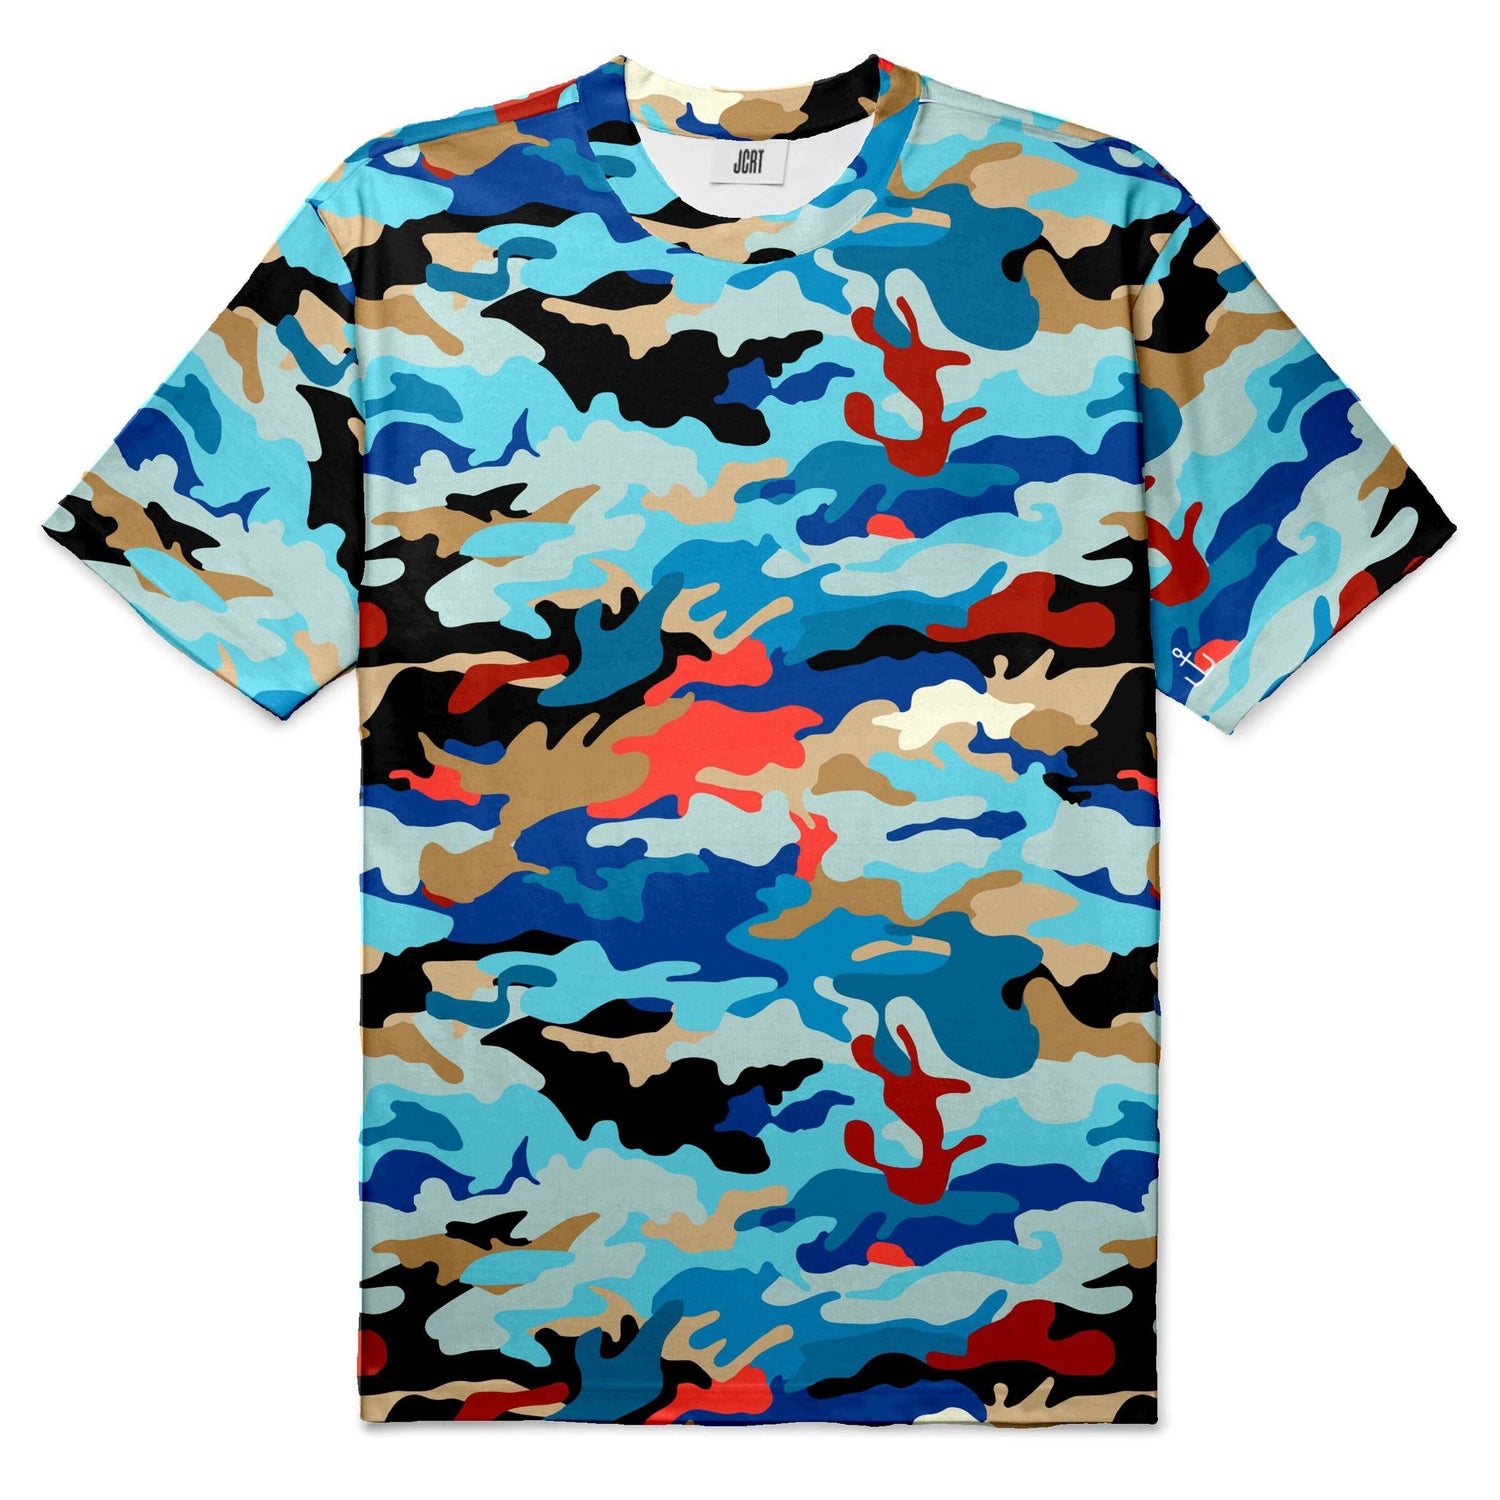 The Fantastic Planet Camouflage T-Shirt